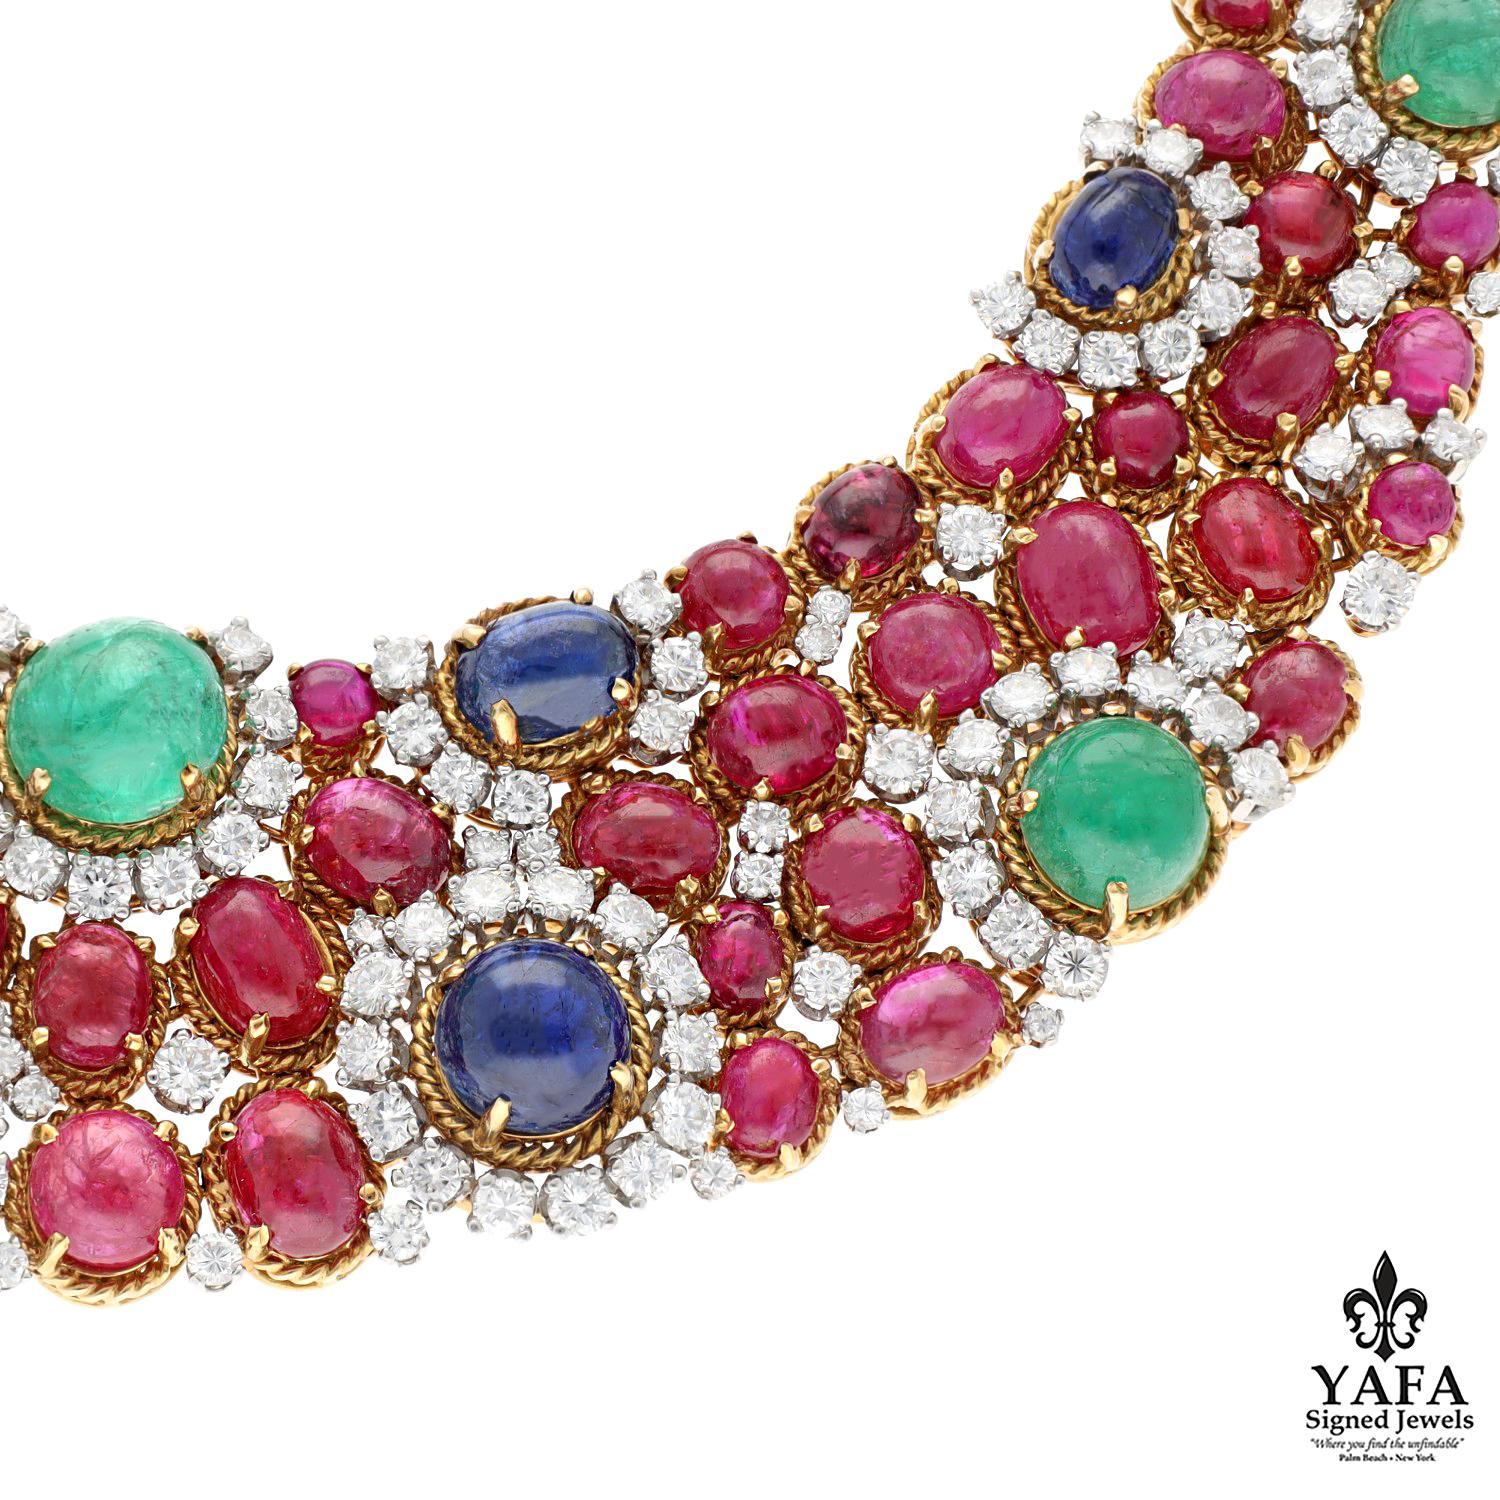 Like Gemstones Tumbled Smooth by a Babbling Brook Through the Centuries, this Work of Art Gleams with Life and Light. Intertwined Throughout are 13 Cabochon Sapphires, 11 Cabochon Emeralds, Numerous Rubies and Diamonds all set in Platinum and 18K